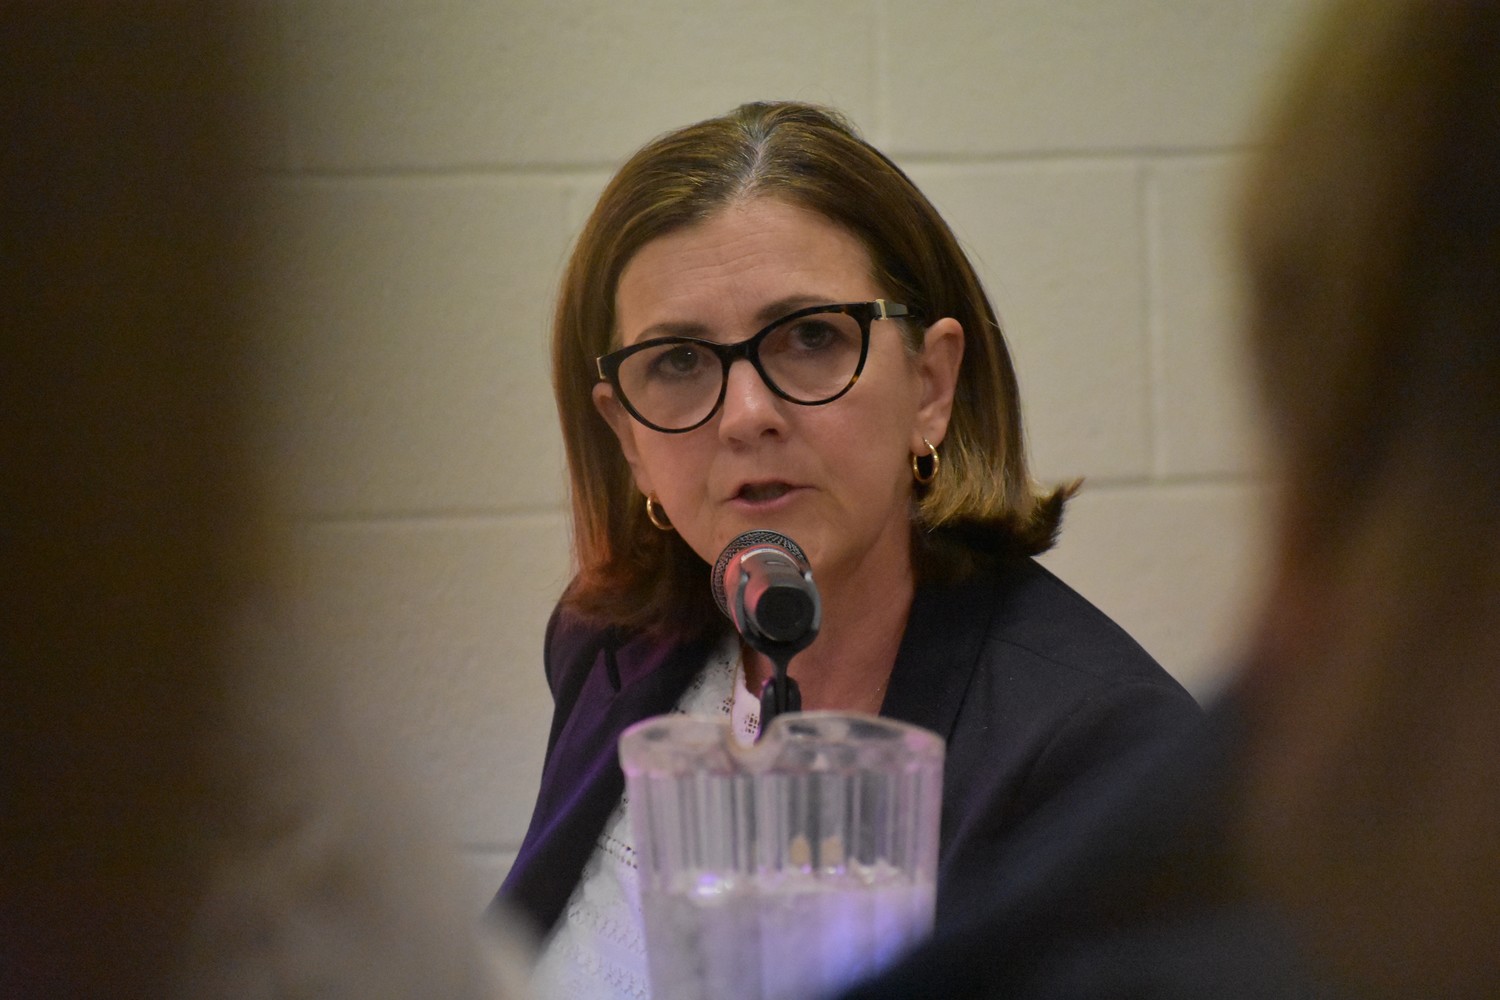 Noreen Leahy, assistant superintendent for pupil personnel services and special education, who also oversees the school district’s drug, alcohol and violence prevention task force, presented the findings at a Board of Education meeting on March 14.